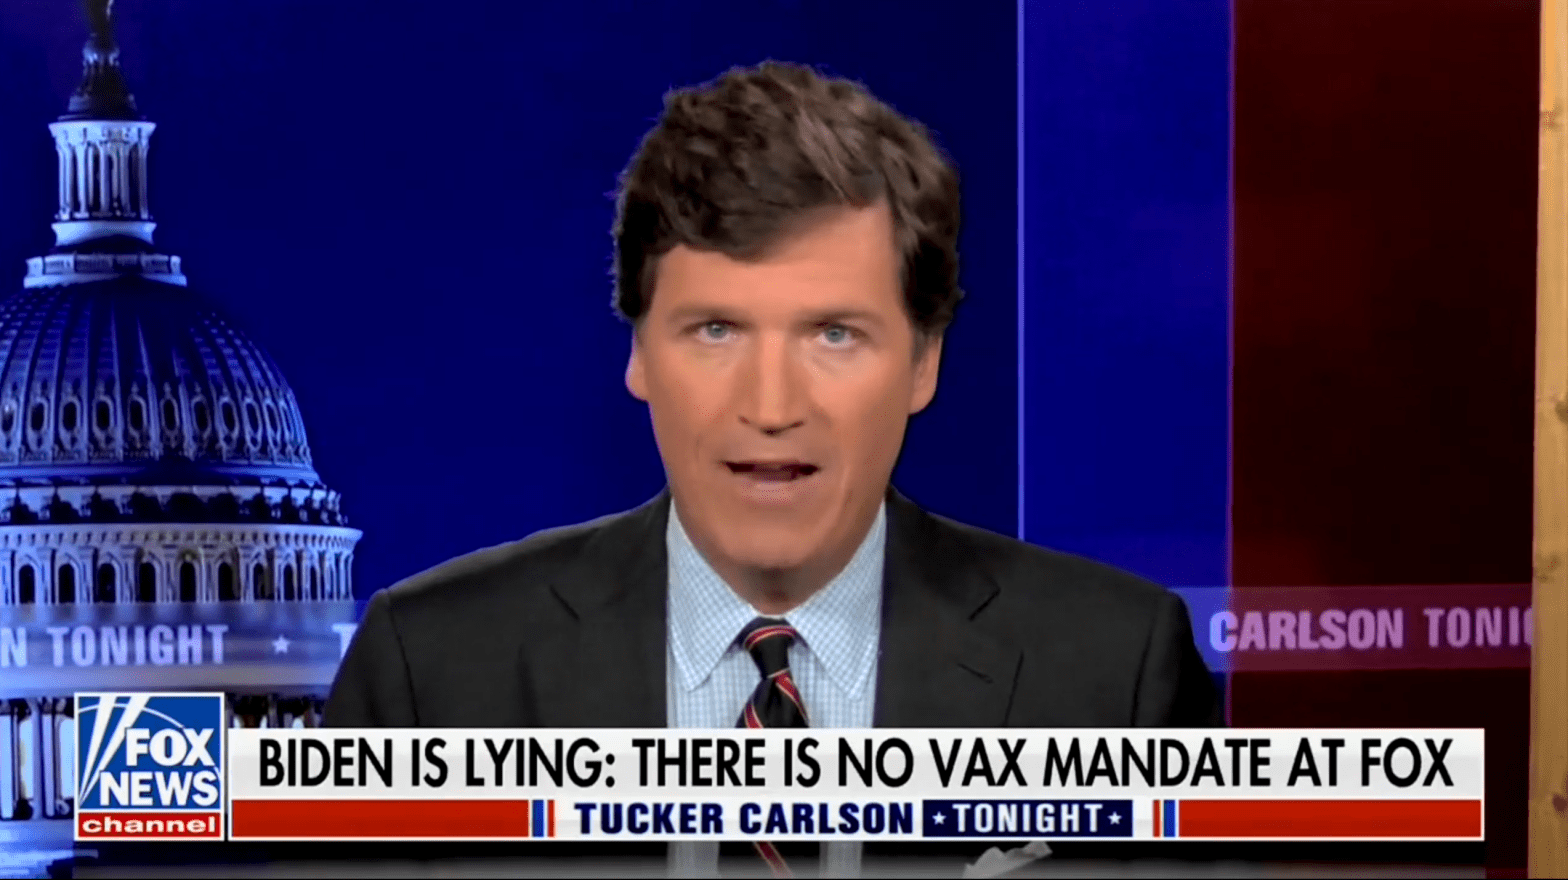 Fox News host Tucker Carlson ramping up for another anti-vax tirade on the Oct. 11, 2021 edition of his show. (Screenshot: Fox News / The Daily Beast, Fair Use)